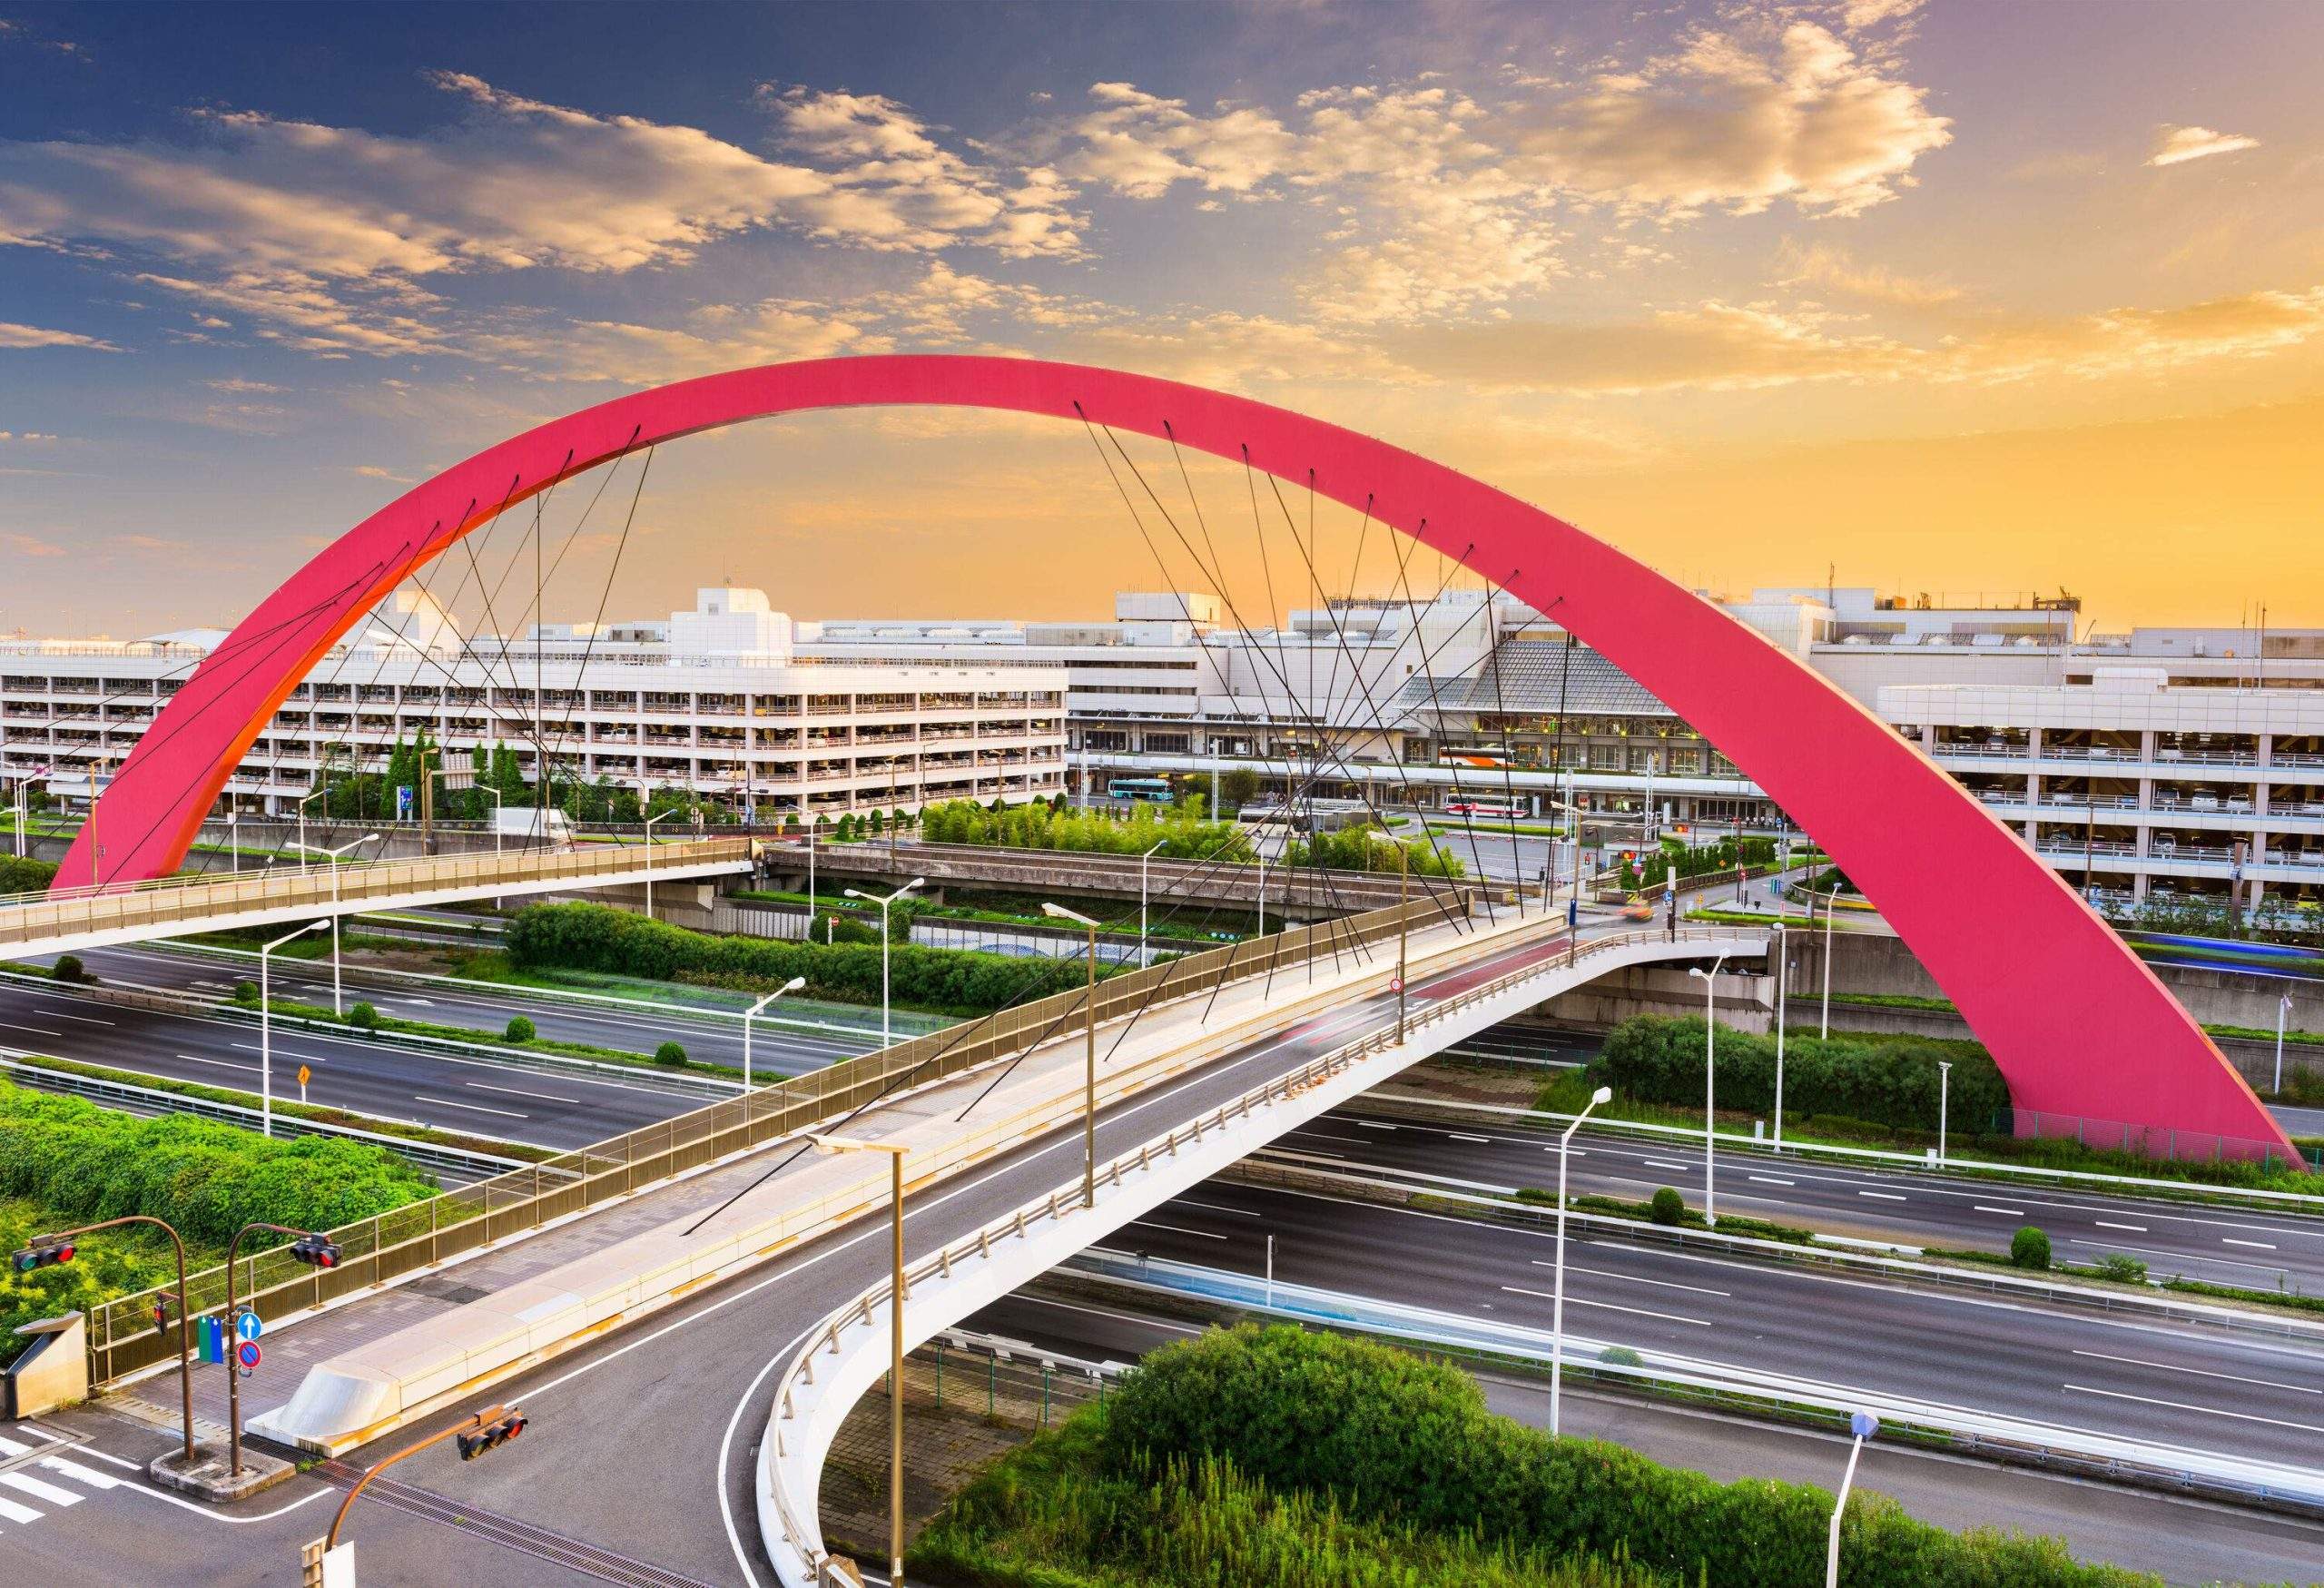 Two road bridges with an aesthetic design suspended by cables in a red sky arch alongside the airport buildings span above the highway.